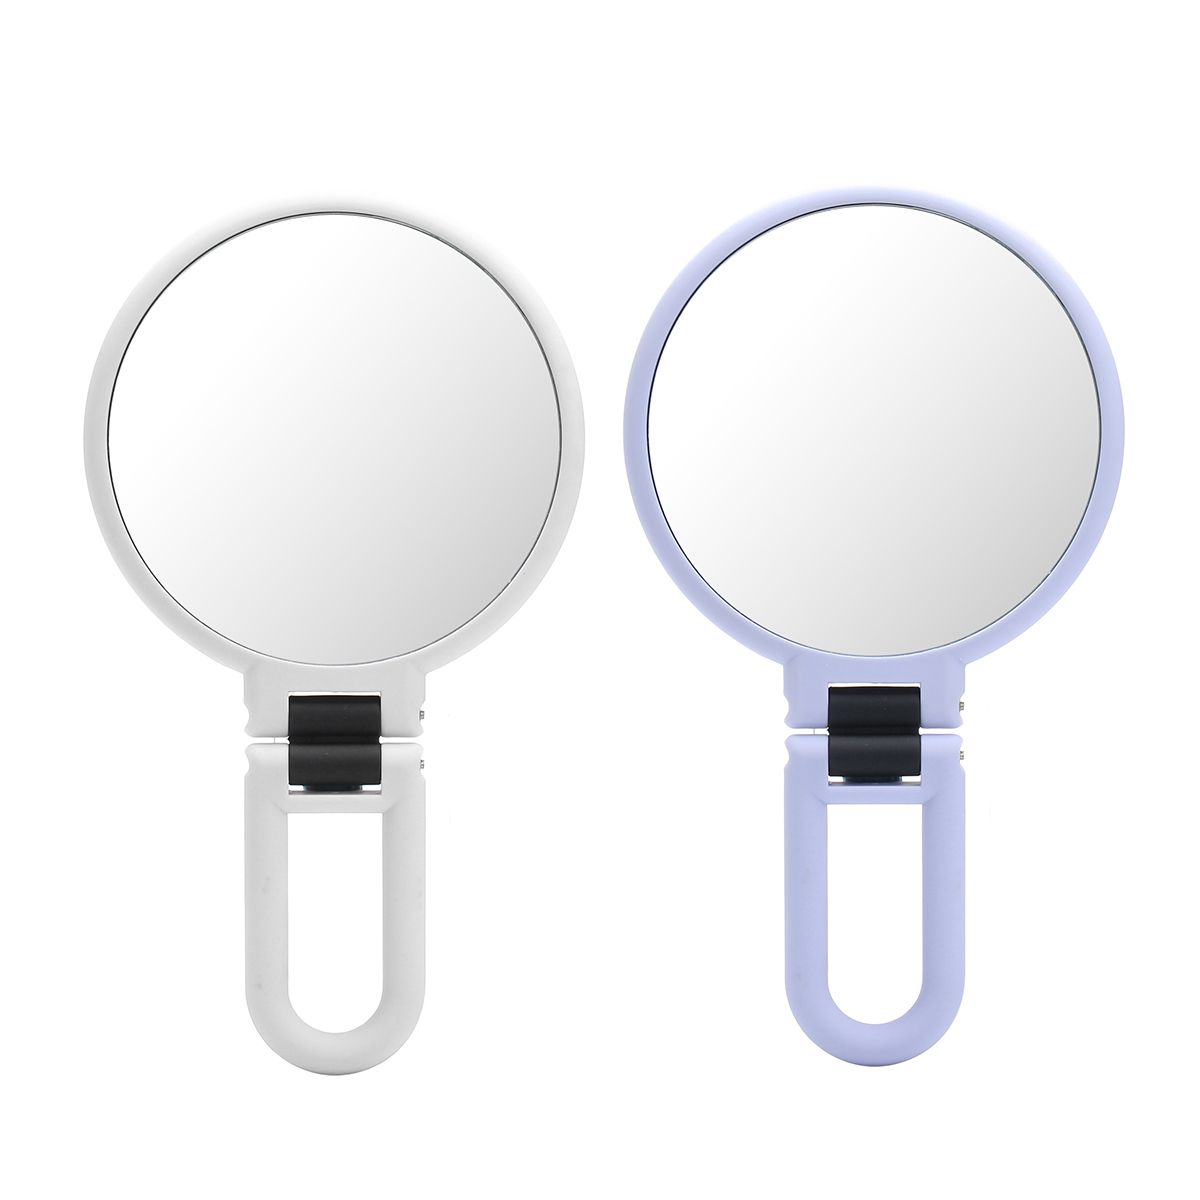 10x-Magnification-Adjustable-Make-Up-Mirrors-Double-Sided-Vanity-Folding-Mirror-Bathroom-Travel-1449164